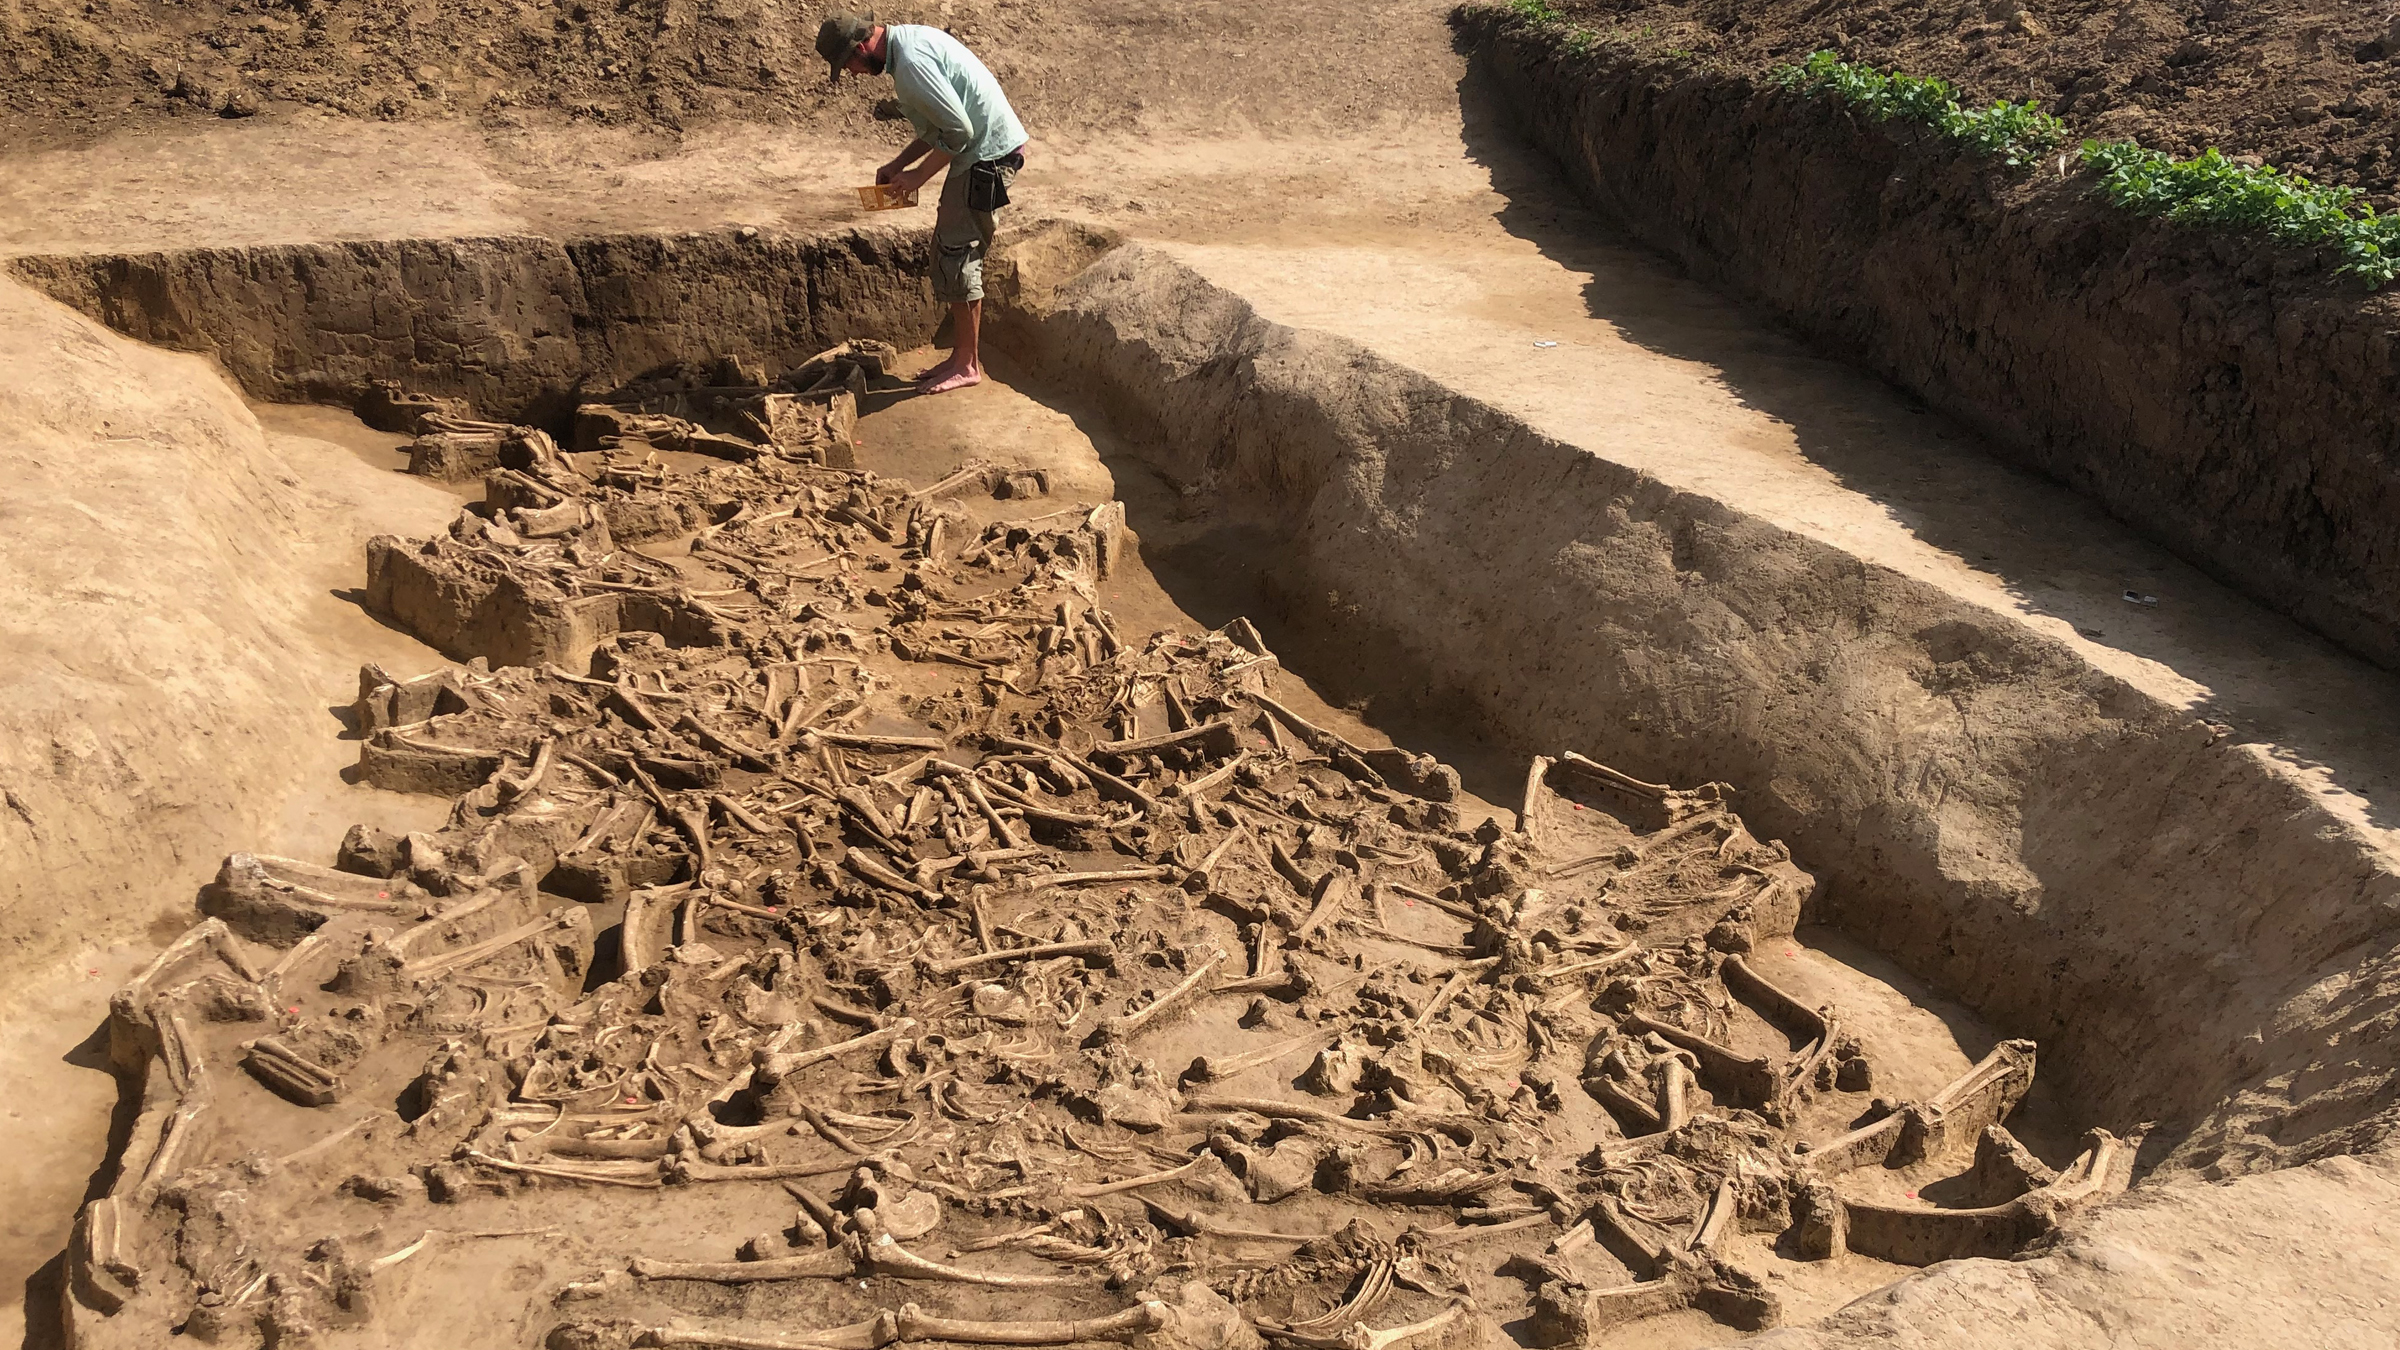 Evidence of child sacrifice found in ancient Turkish cemetery